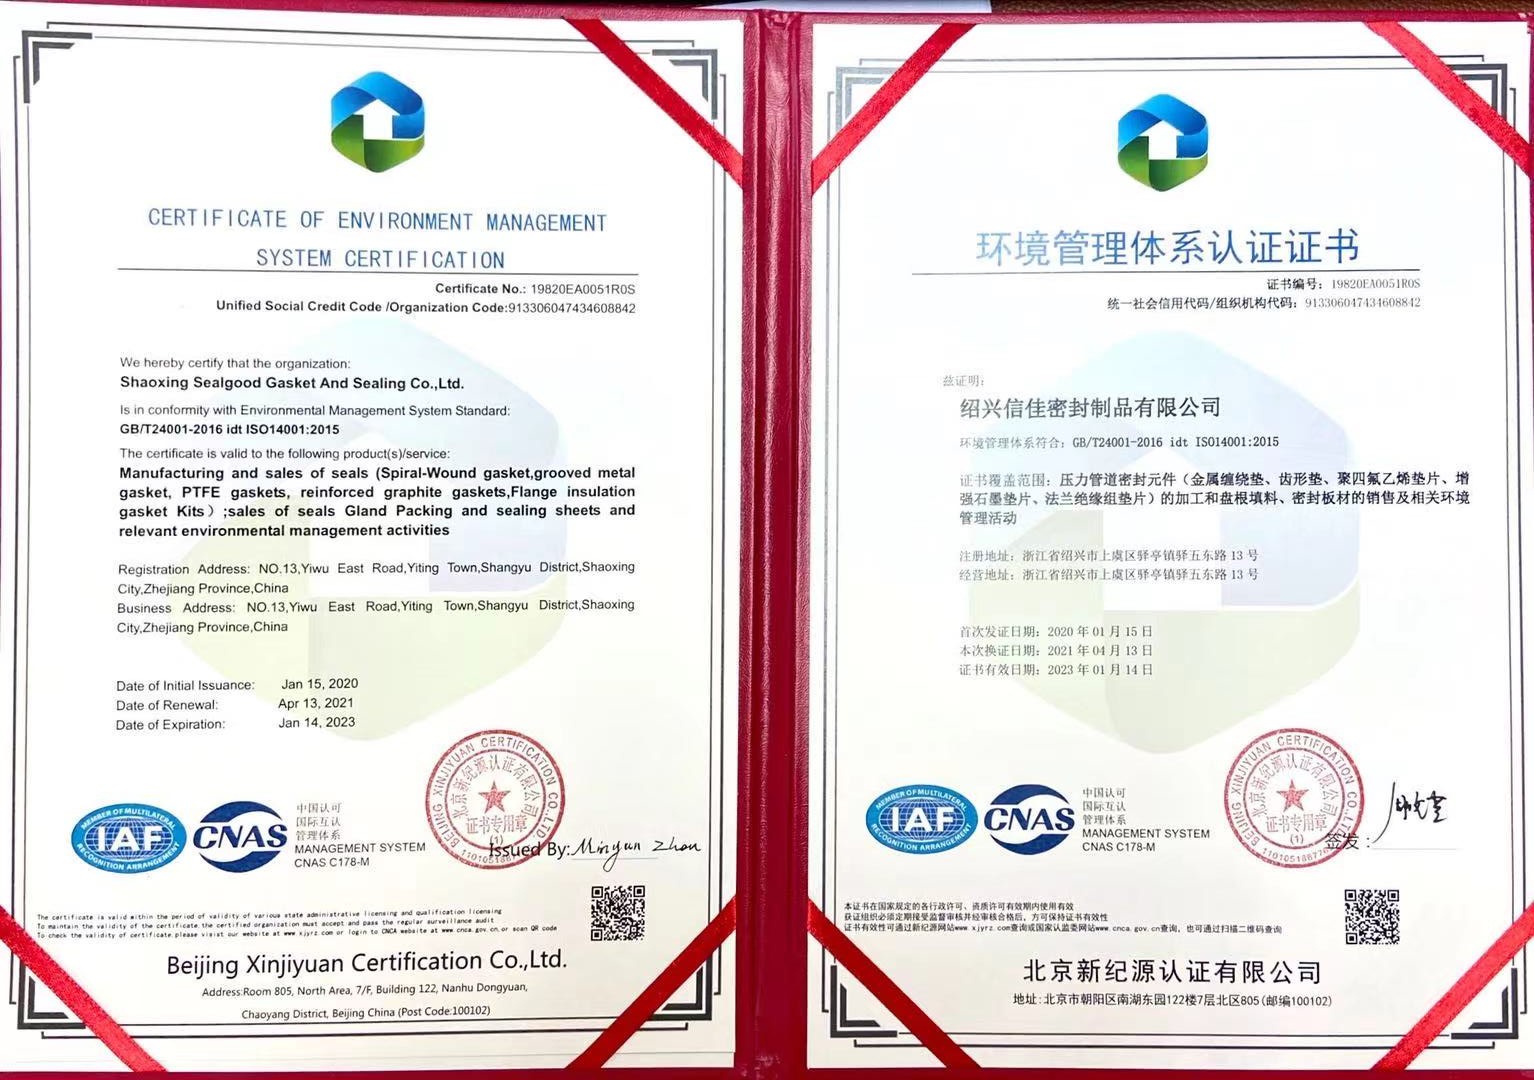 Shaoxing Sealgood gasket and sealing Co., Ltd. obtained a new certification